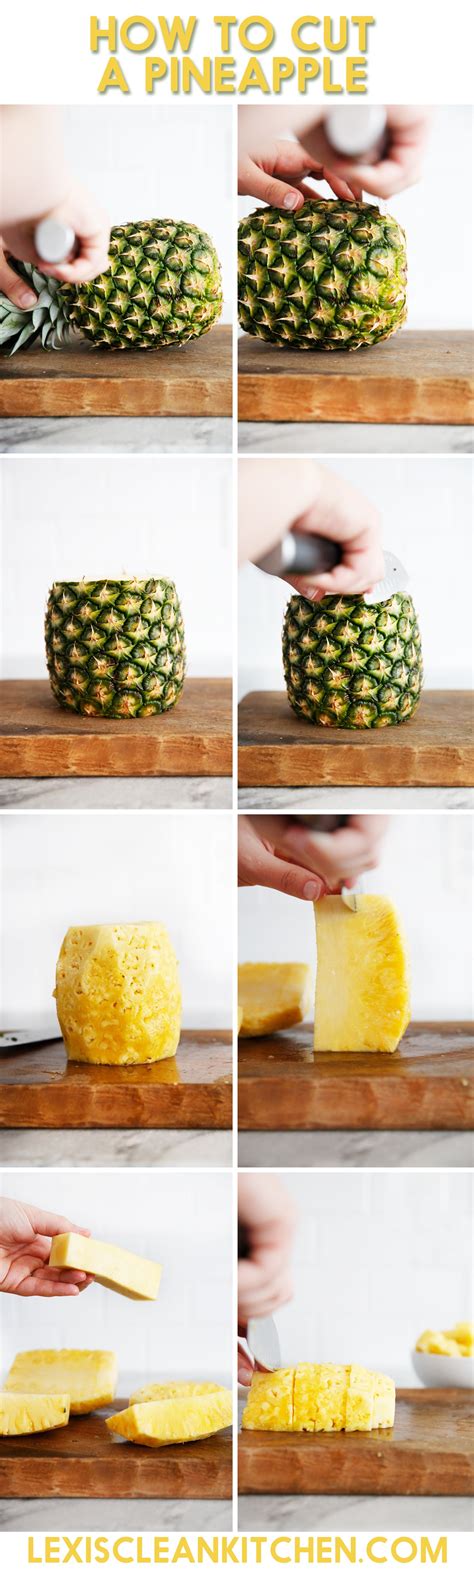 How To Cut A Pineapple Step By Step Guide Lexis Clean Kitchen